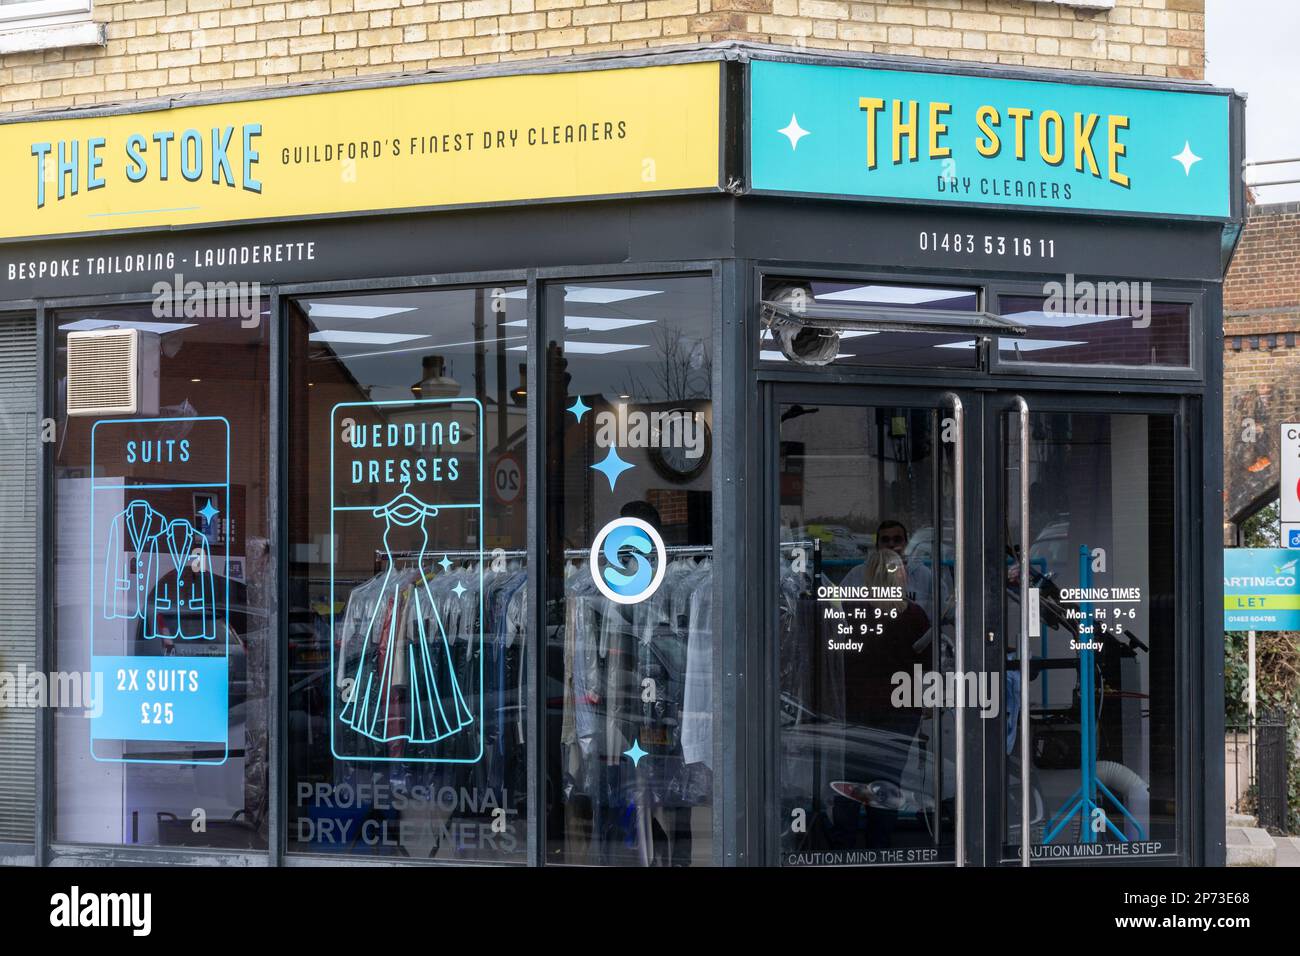 The Stoke Dry Cleaners, magasin, Surrey, Angleterre, Royaume-Uni, services de blanchisserie Banque D'Images